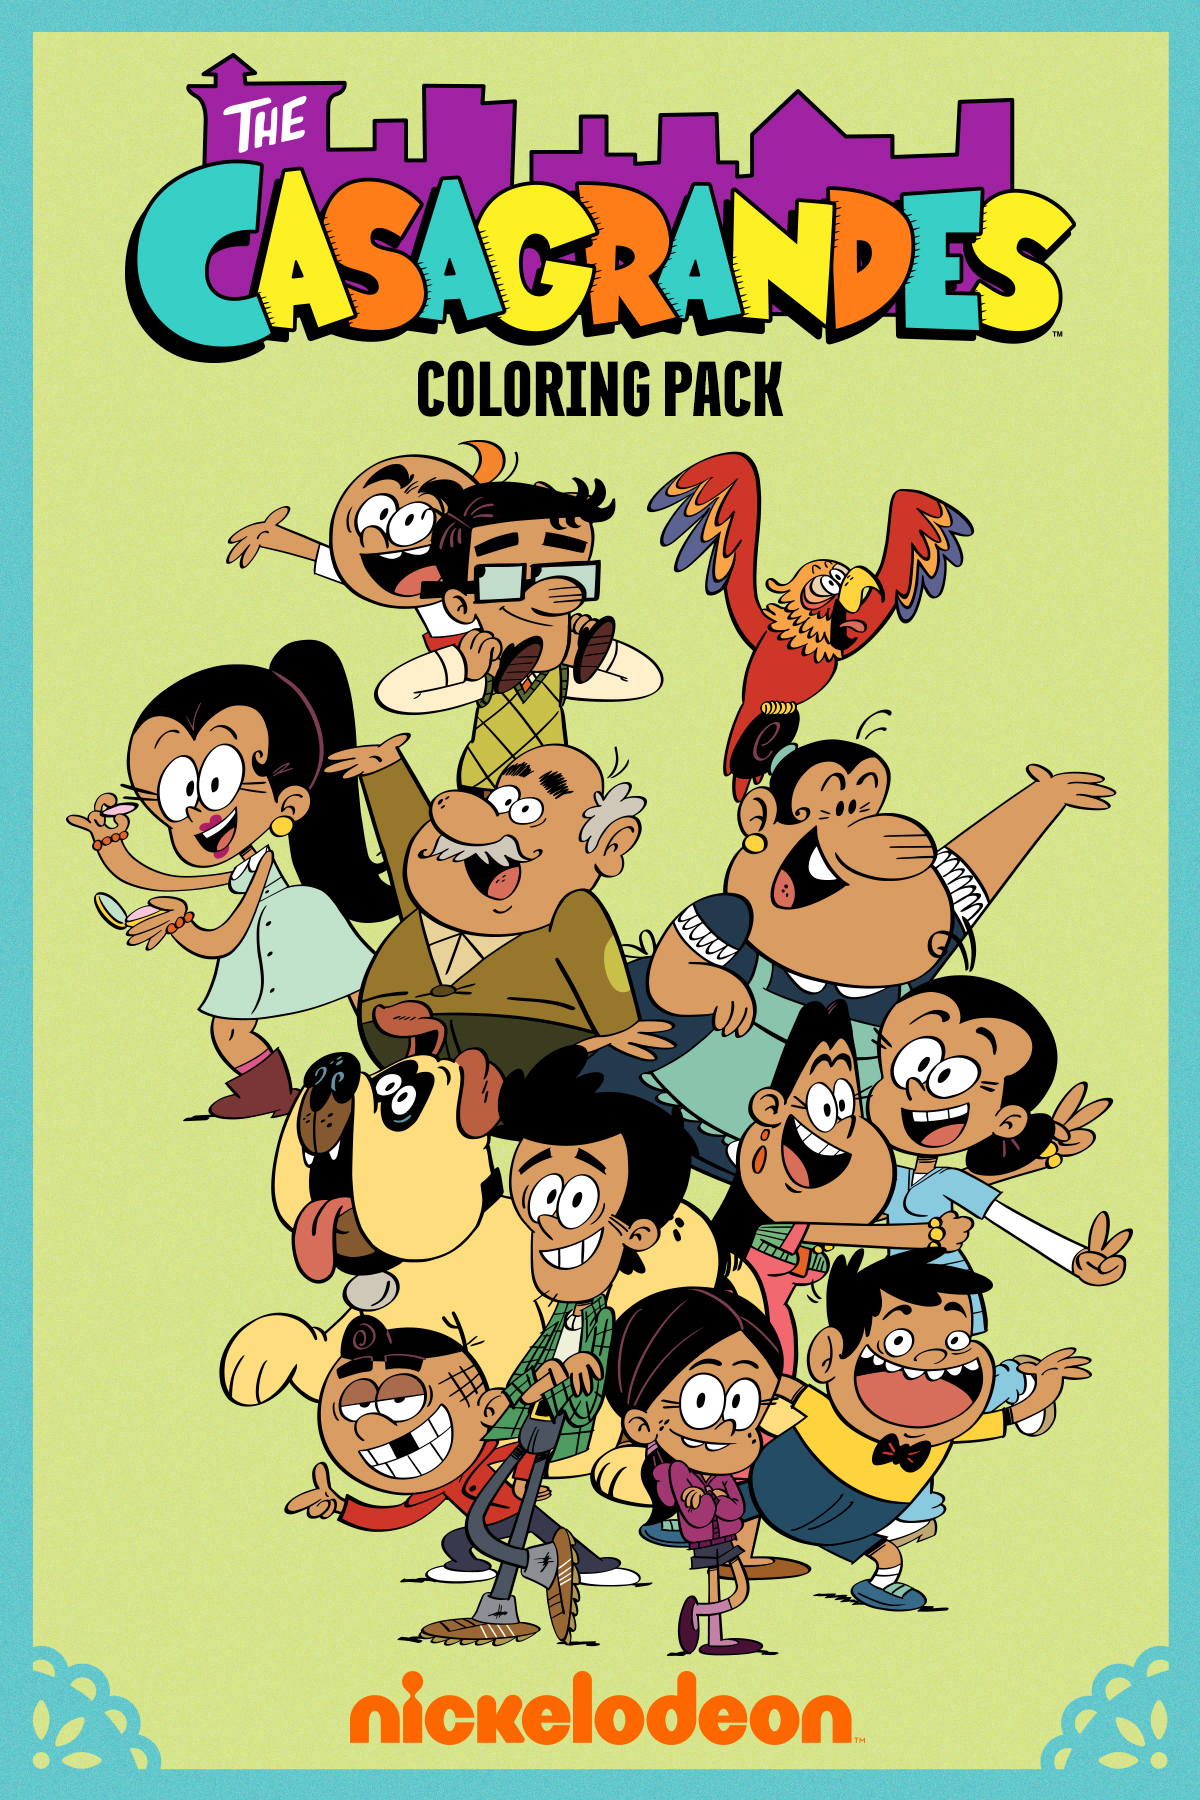 The Casagrandes Coloring Pack